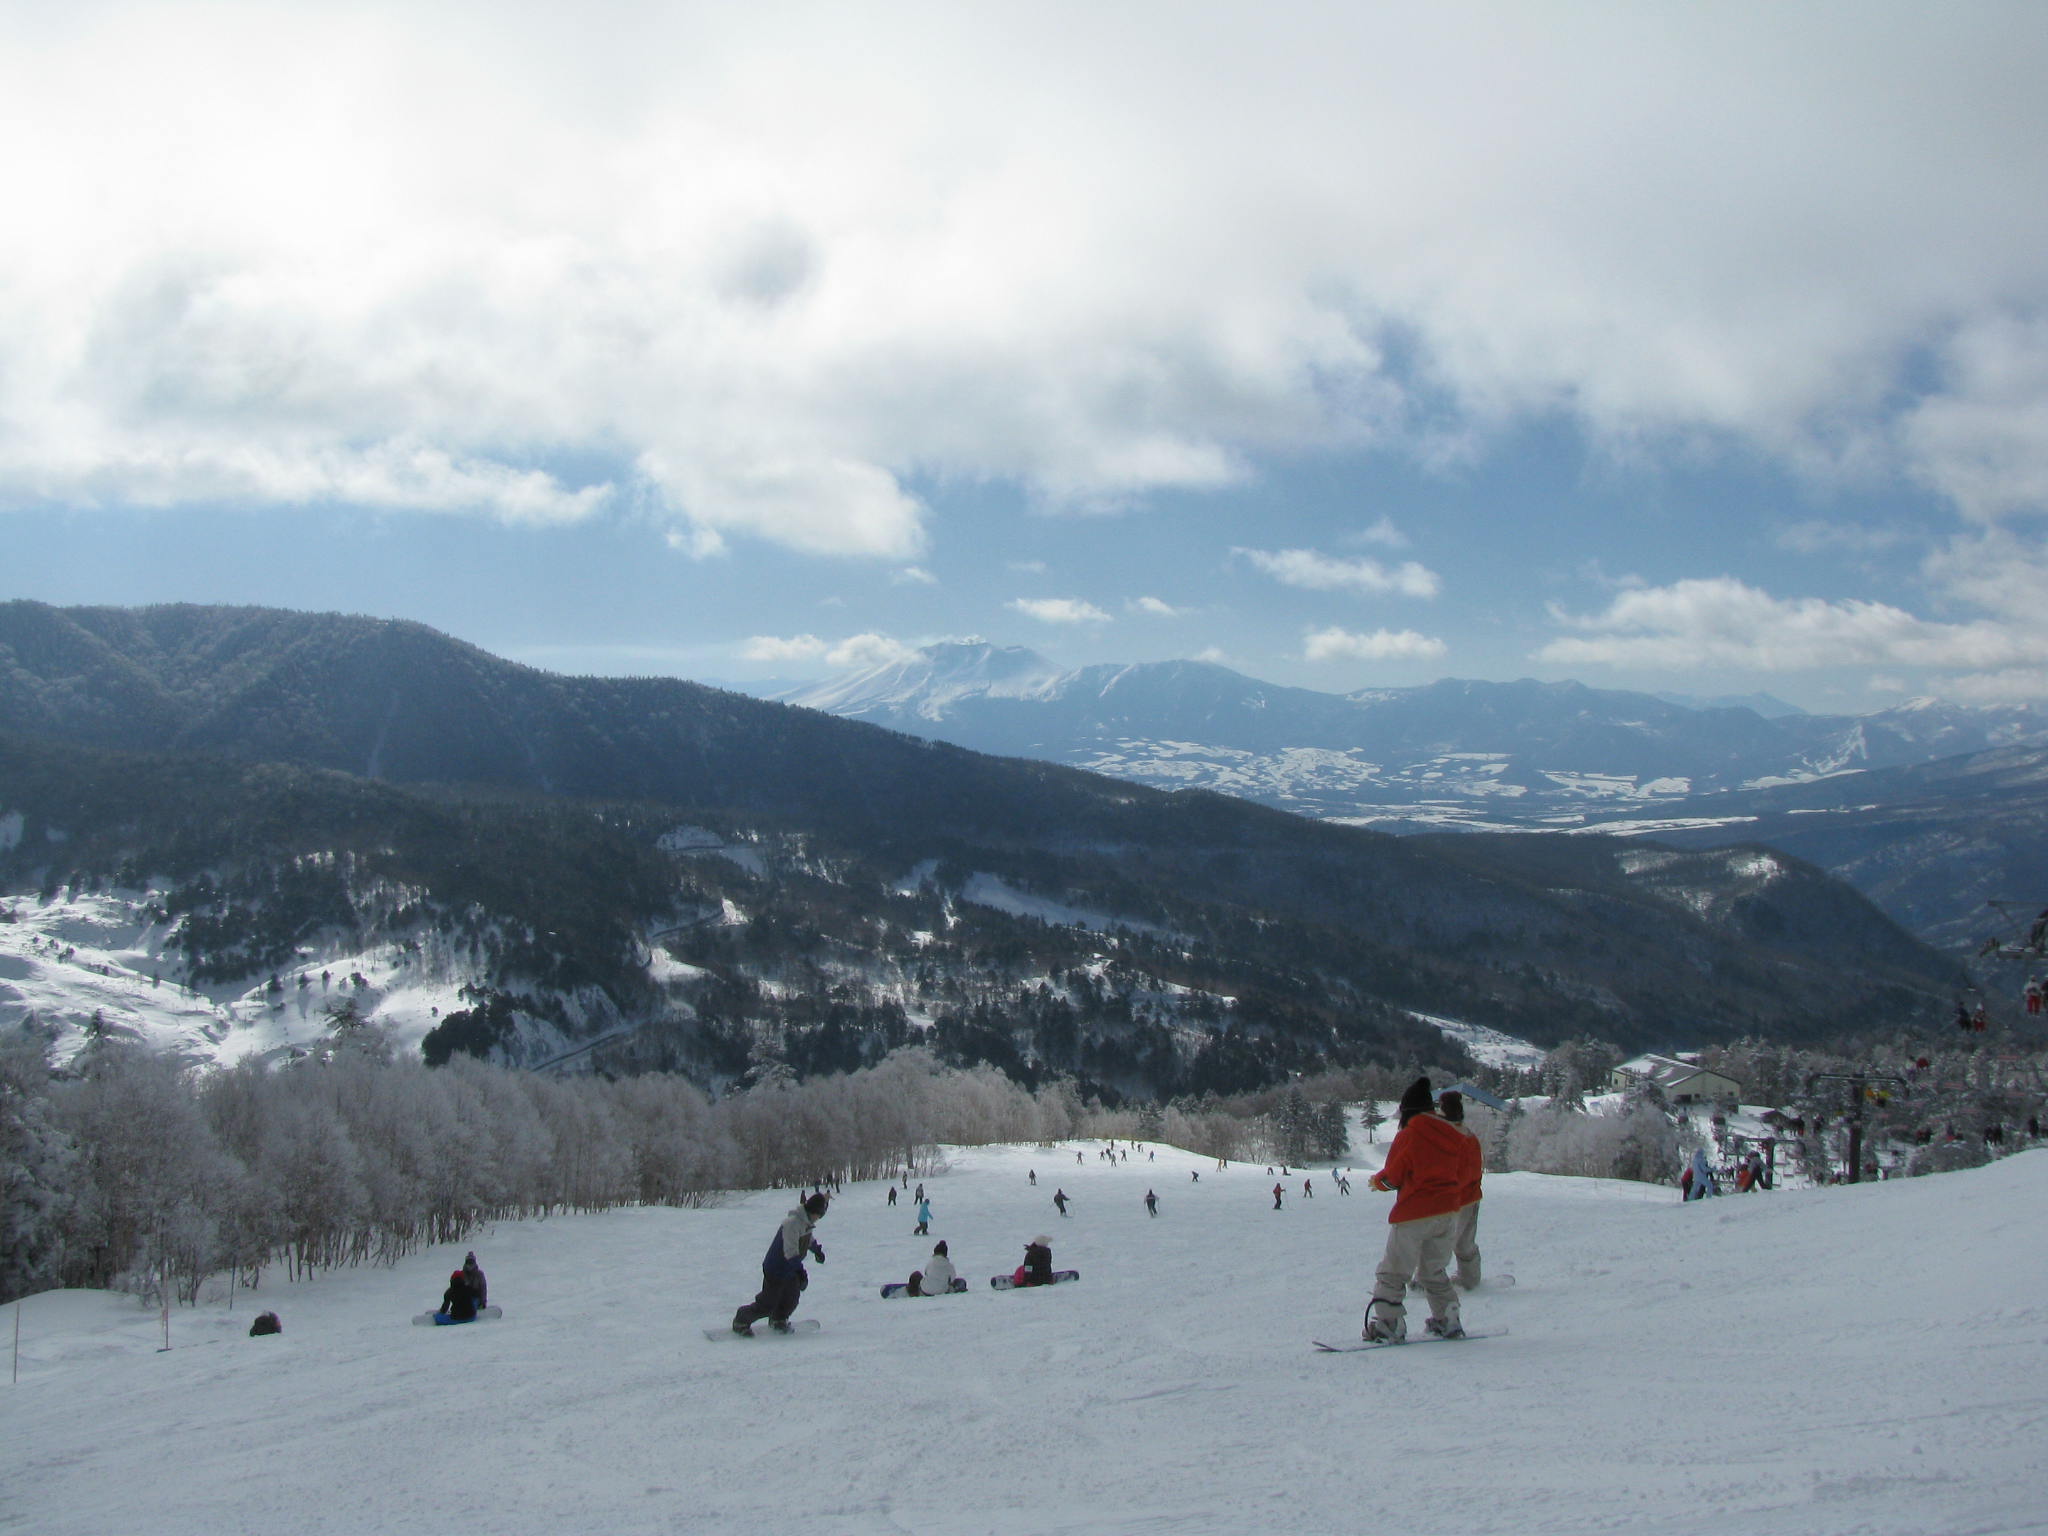 Cheap Ski Trip Tokyo Great Cycling Tour Staff Blog with The Stylish  how to ski japan cheap intended for Your property